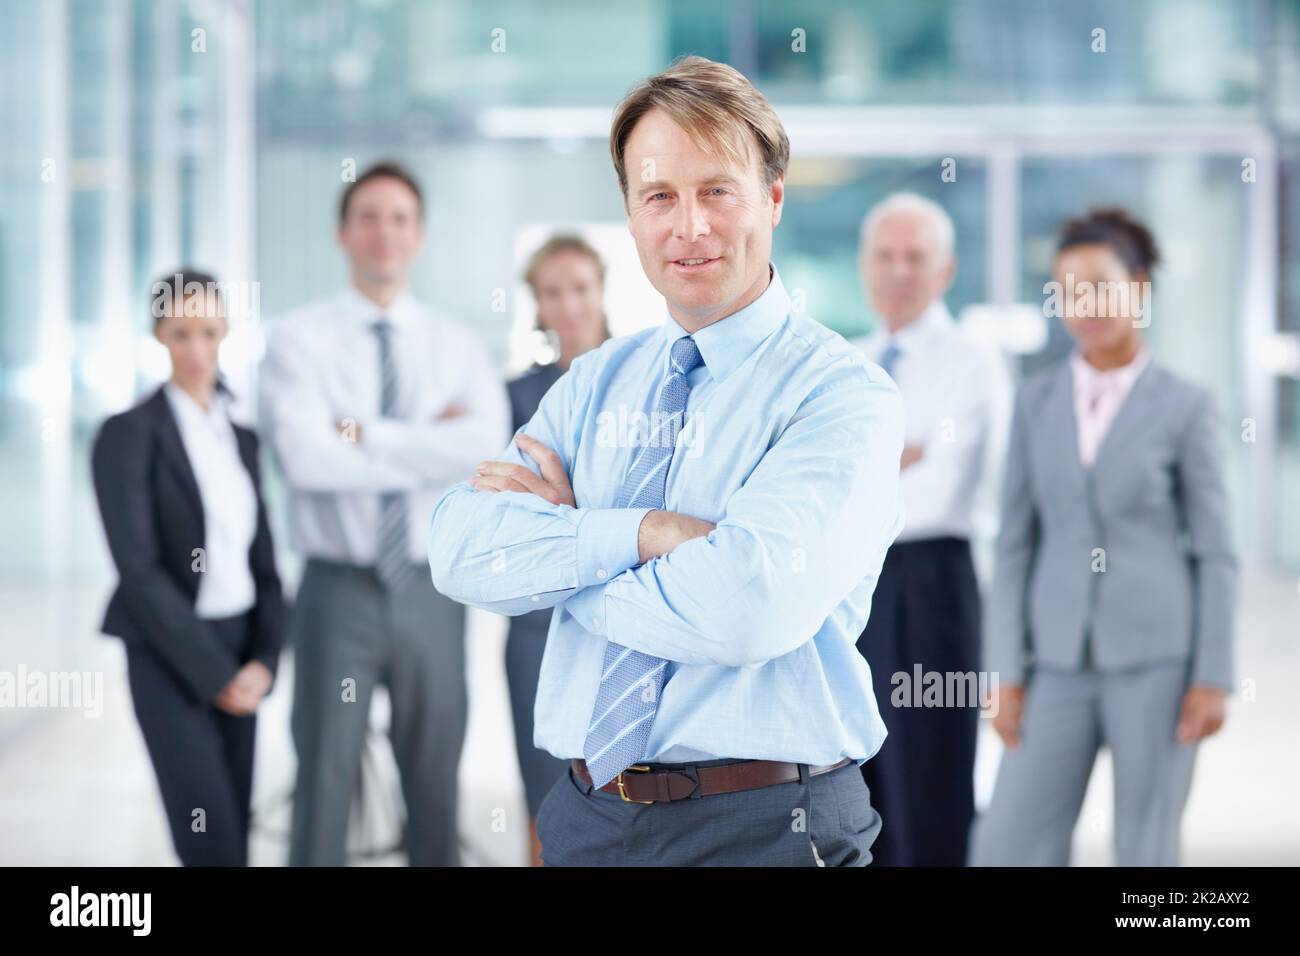 Ive got a great team behind me. Confident mature business executive smiling while standing with his team behind him - portrait. Stock Photo